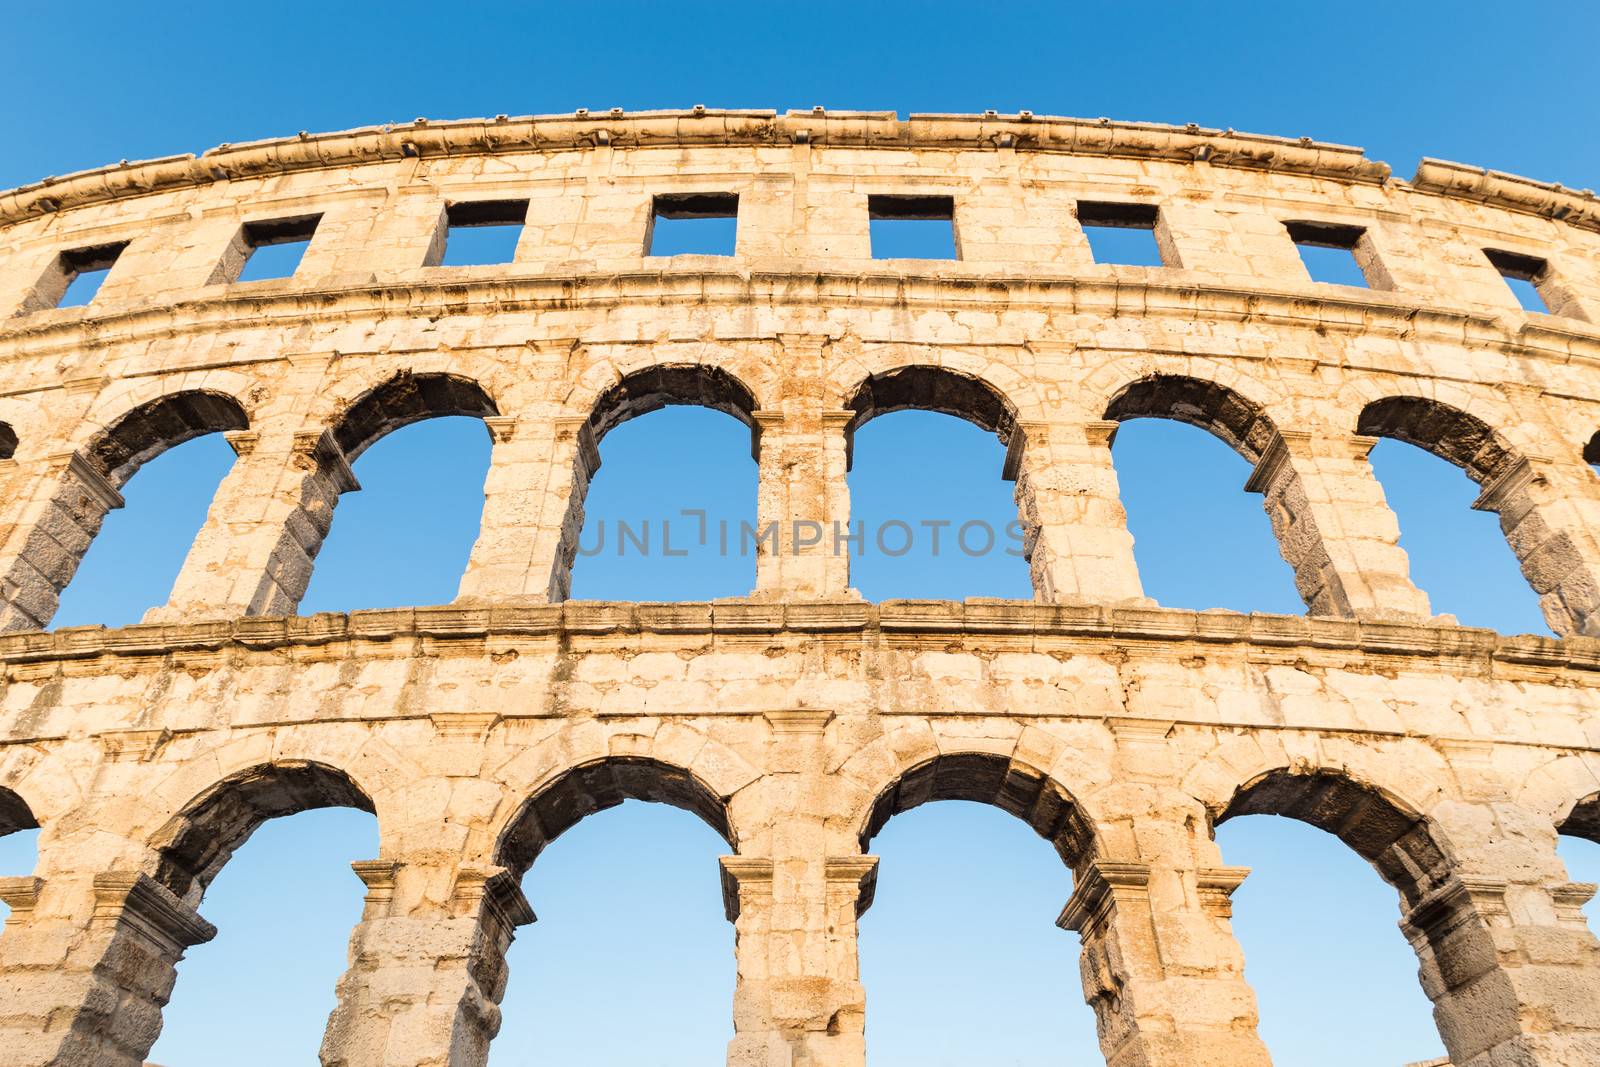 The Roman Amphitheater of Pula, Croatia shot at dusk. It was constructed in 27 - 68 AD and is among the six largest surviving Roman arenas in the World and best preserved ancient monument in Croatia.